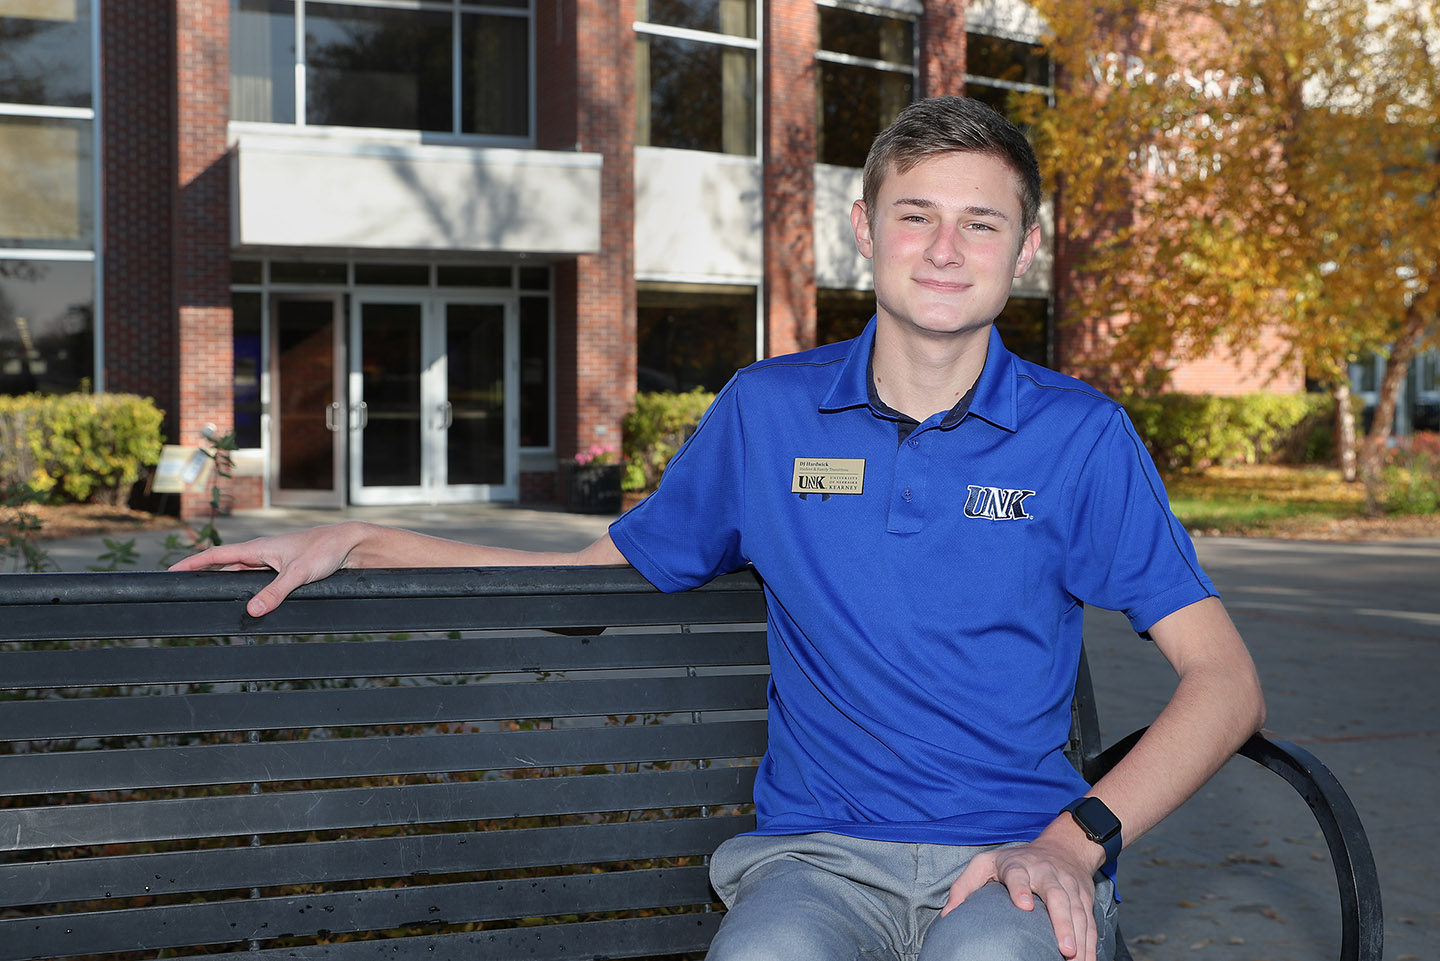 UNK senior DJ Hardwick serves campus in a variety of roles. He’s the student coordinator in the Office of Student and Family Transitions, as well as a resident assistant and student representative on the First Generation Leadership Team. (Photos by Erika Pritchard, UNK Communications)